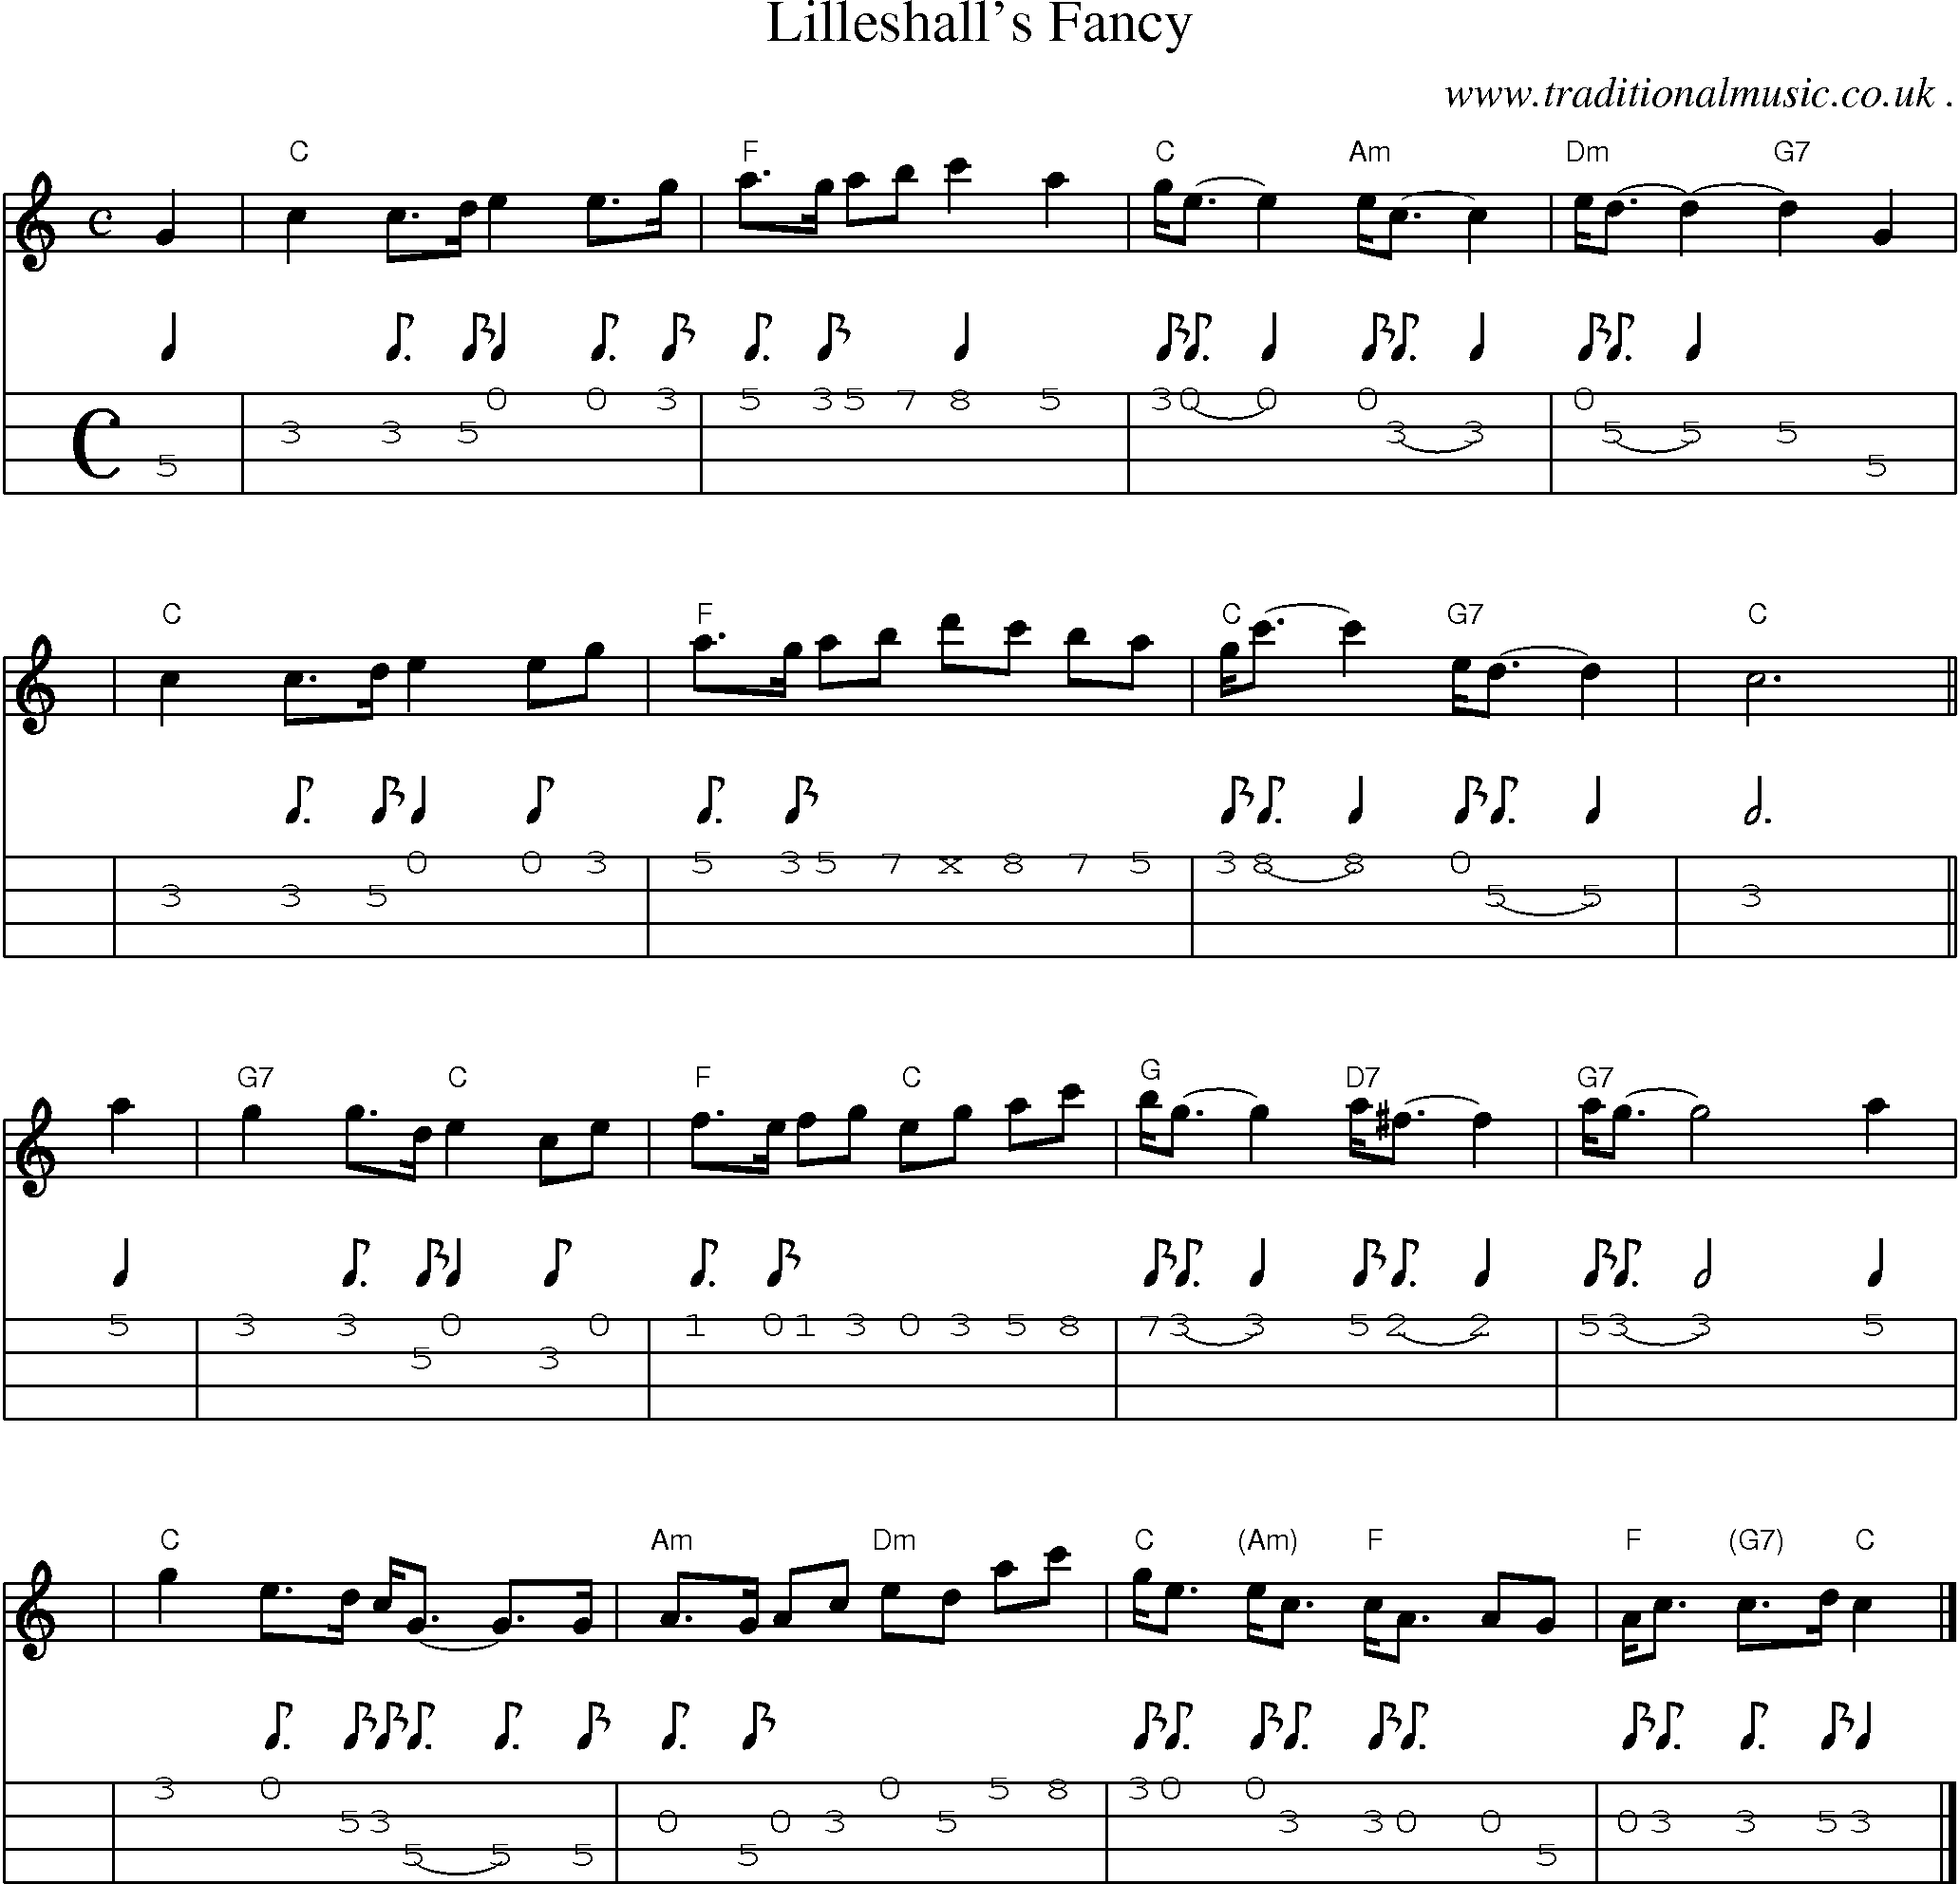 Sheet-music  score, Chords and Mandolin Tabs for Lilleshalls Fancy